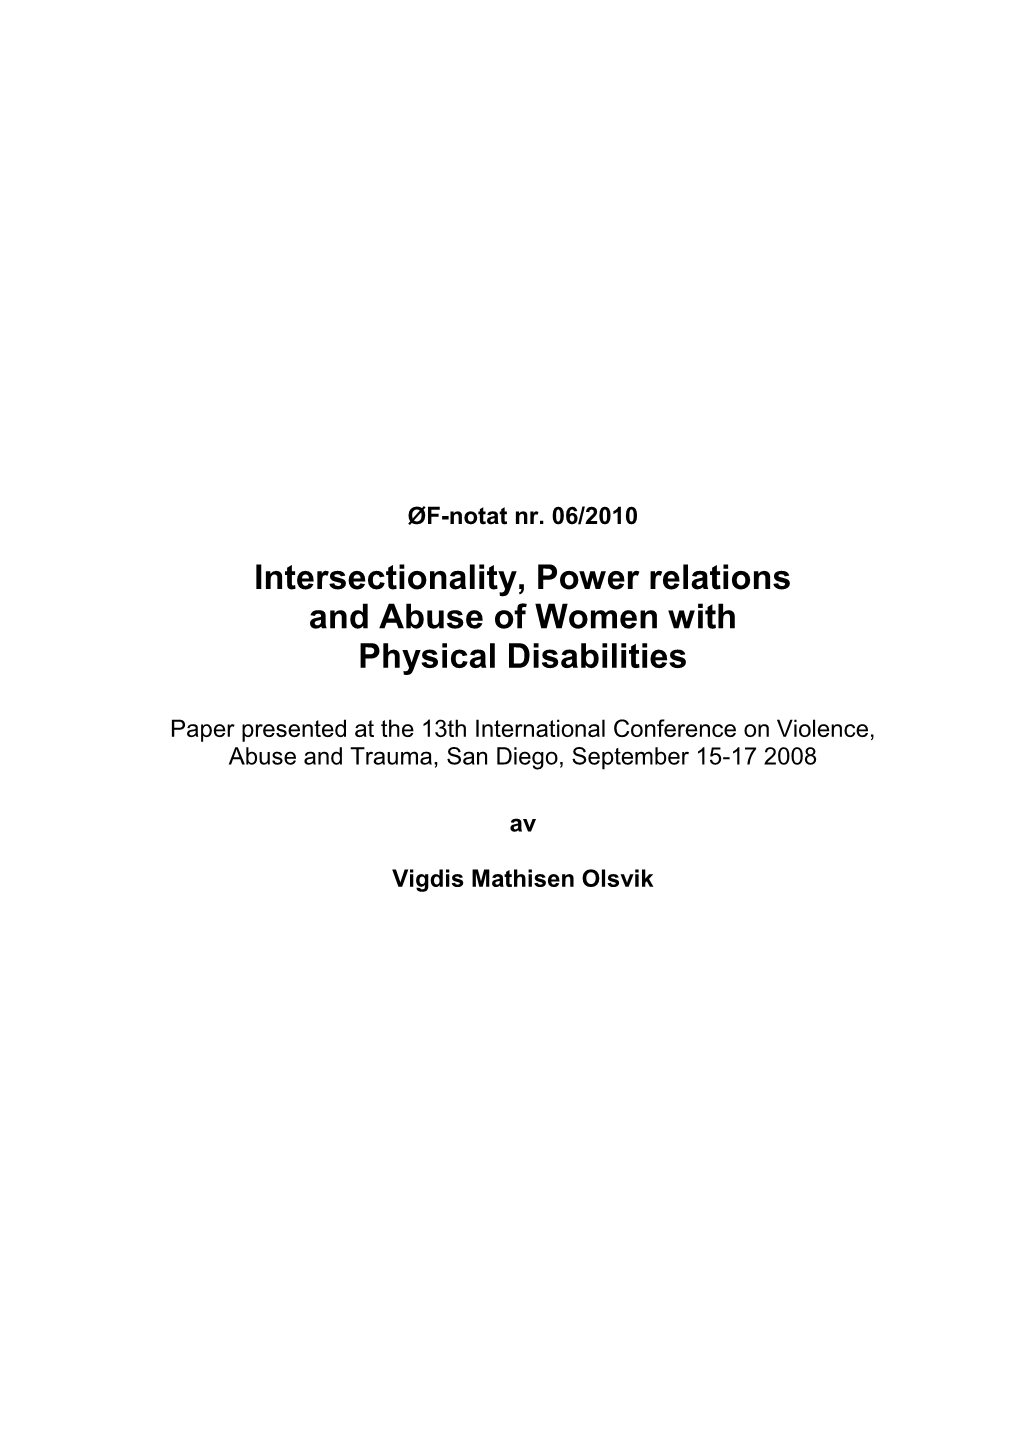 Intersectionality, Power Relations and Abuse of Women with Physical Disabilities